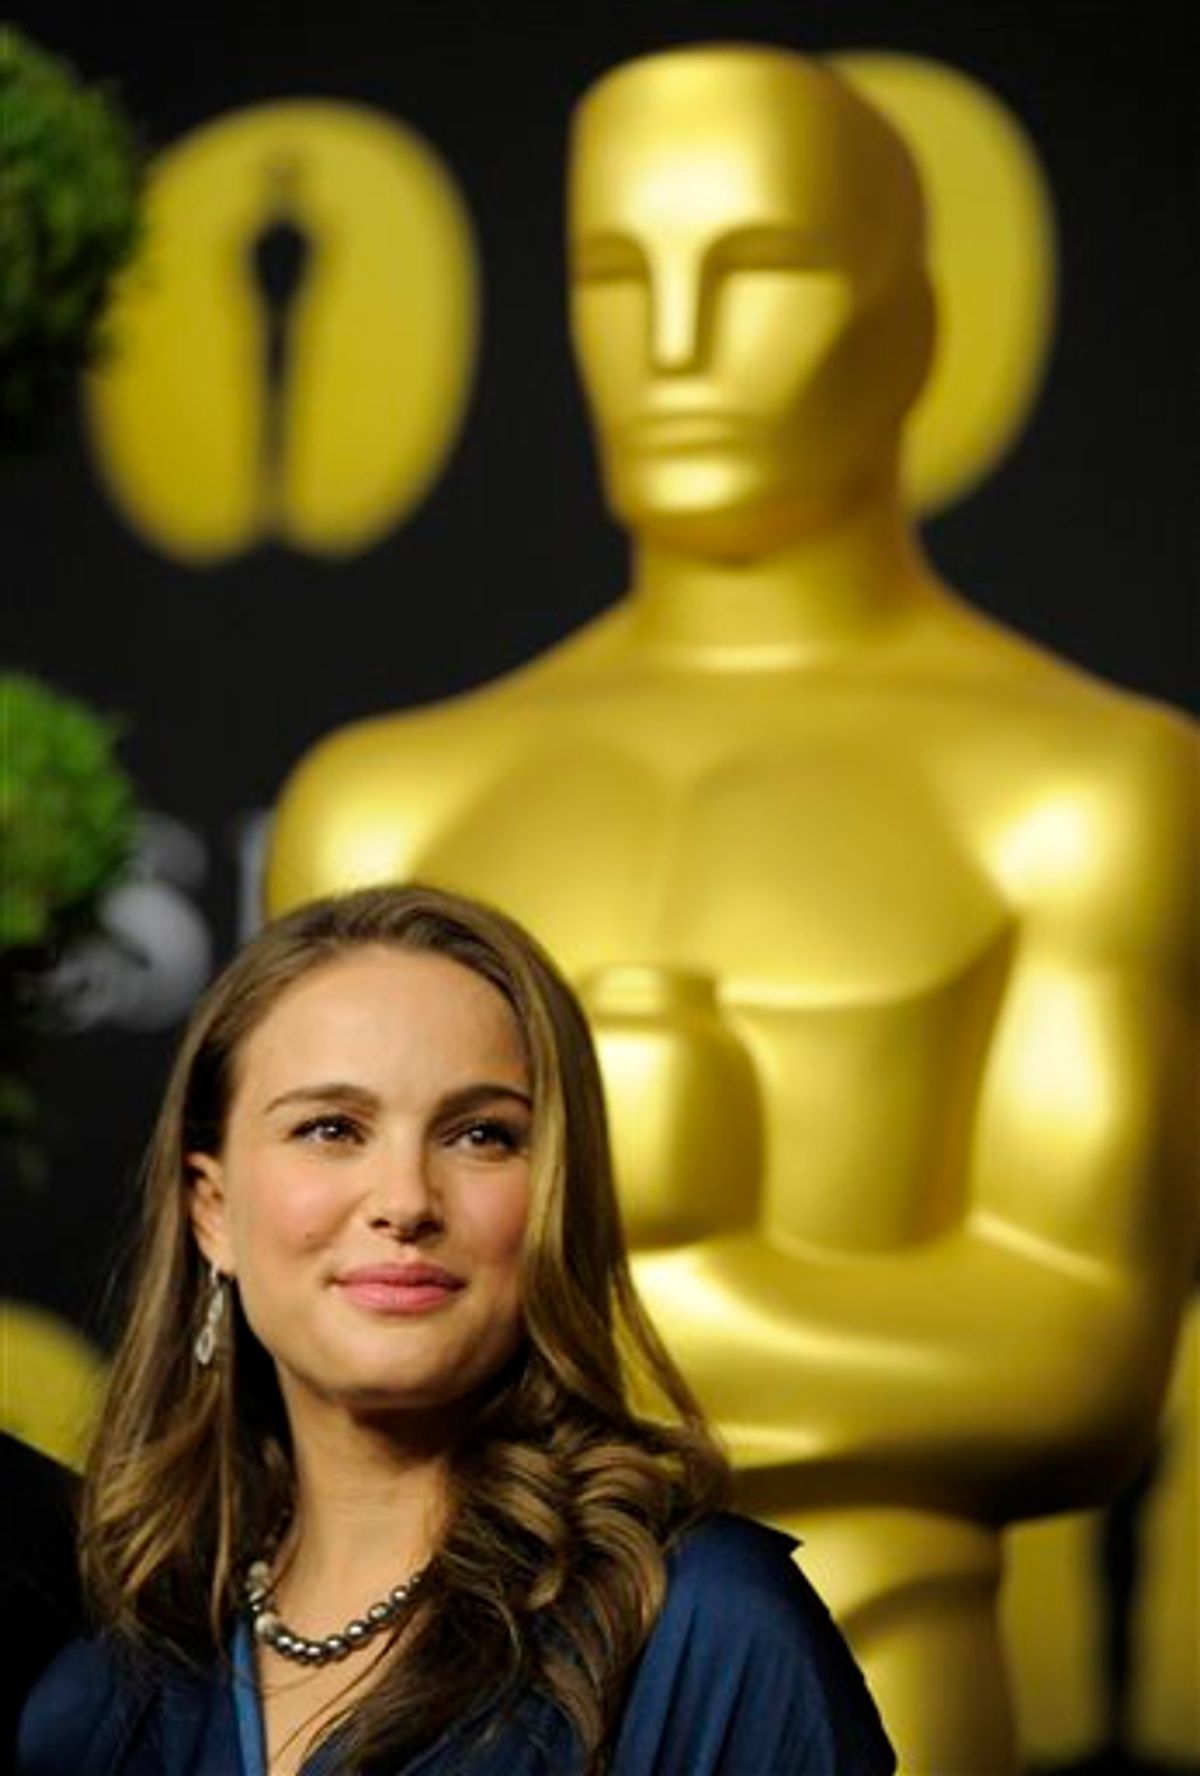 Natalie Portman, an Oscar nominee for Actress in a Leading Role for "Black Swan," arrives at the 30th Academy Awards Nominees Luncheon in Beverly Hills, Calif., Monday, Feb. 7, 2011. (AP Photo/Chris Pizzello) (AP)